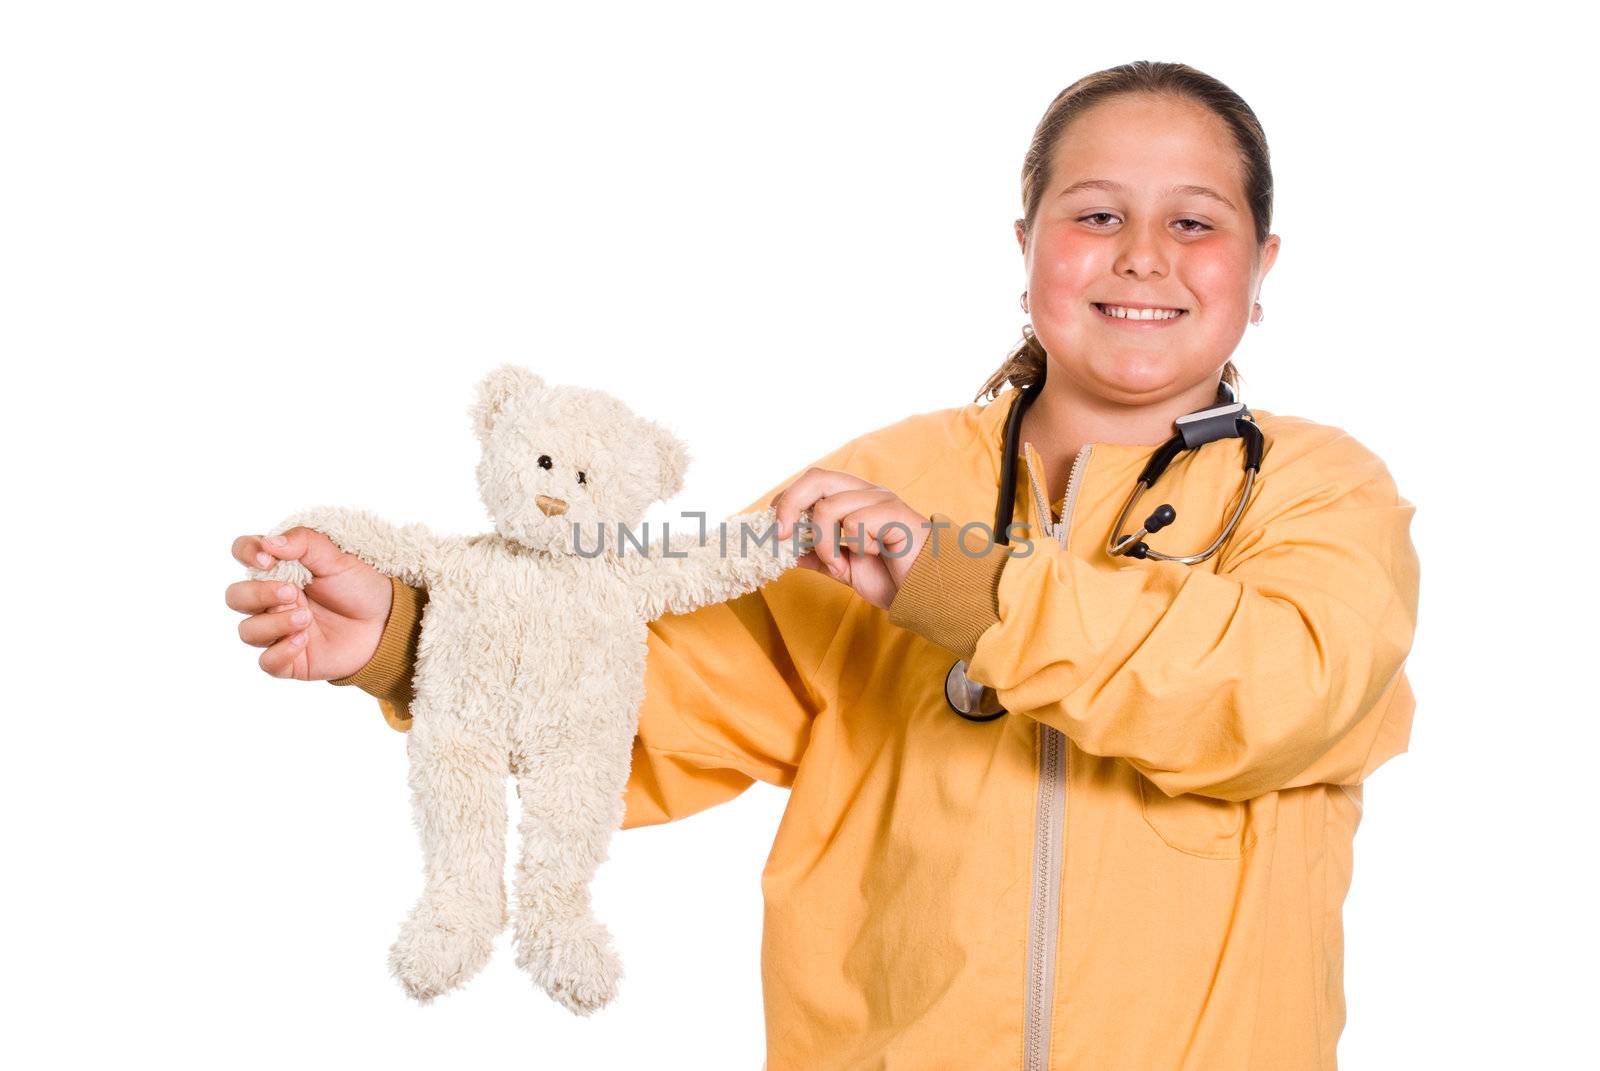 A young girl holding up a stuffed bear while wearing a stethoscope, isolated against a white background